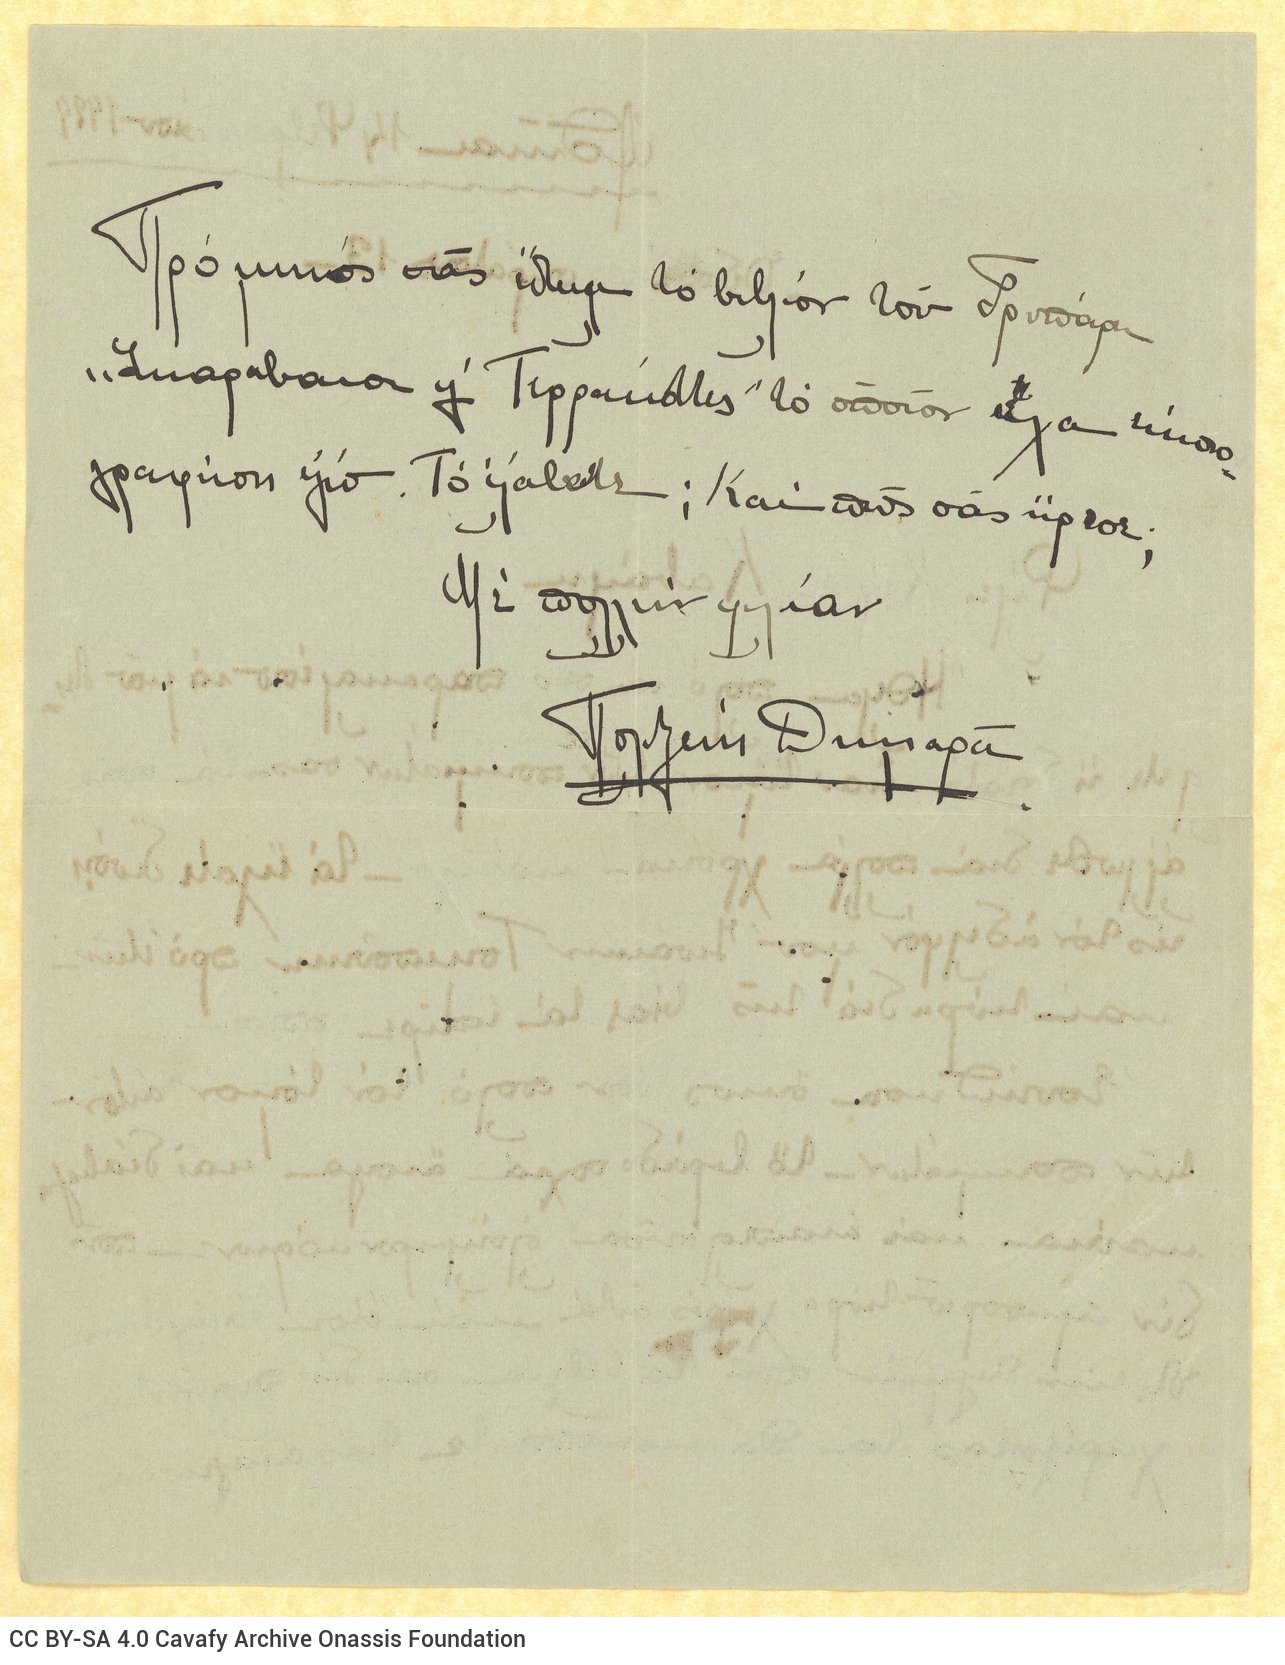 Handwritten letter by Polyxeni Dimara to Cavafy. The author asks to be sent a poetry collection of his and informs him that s